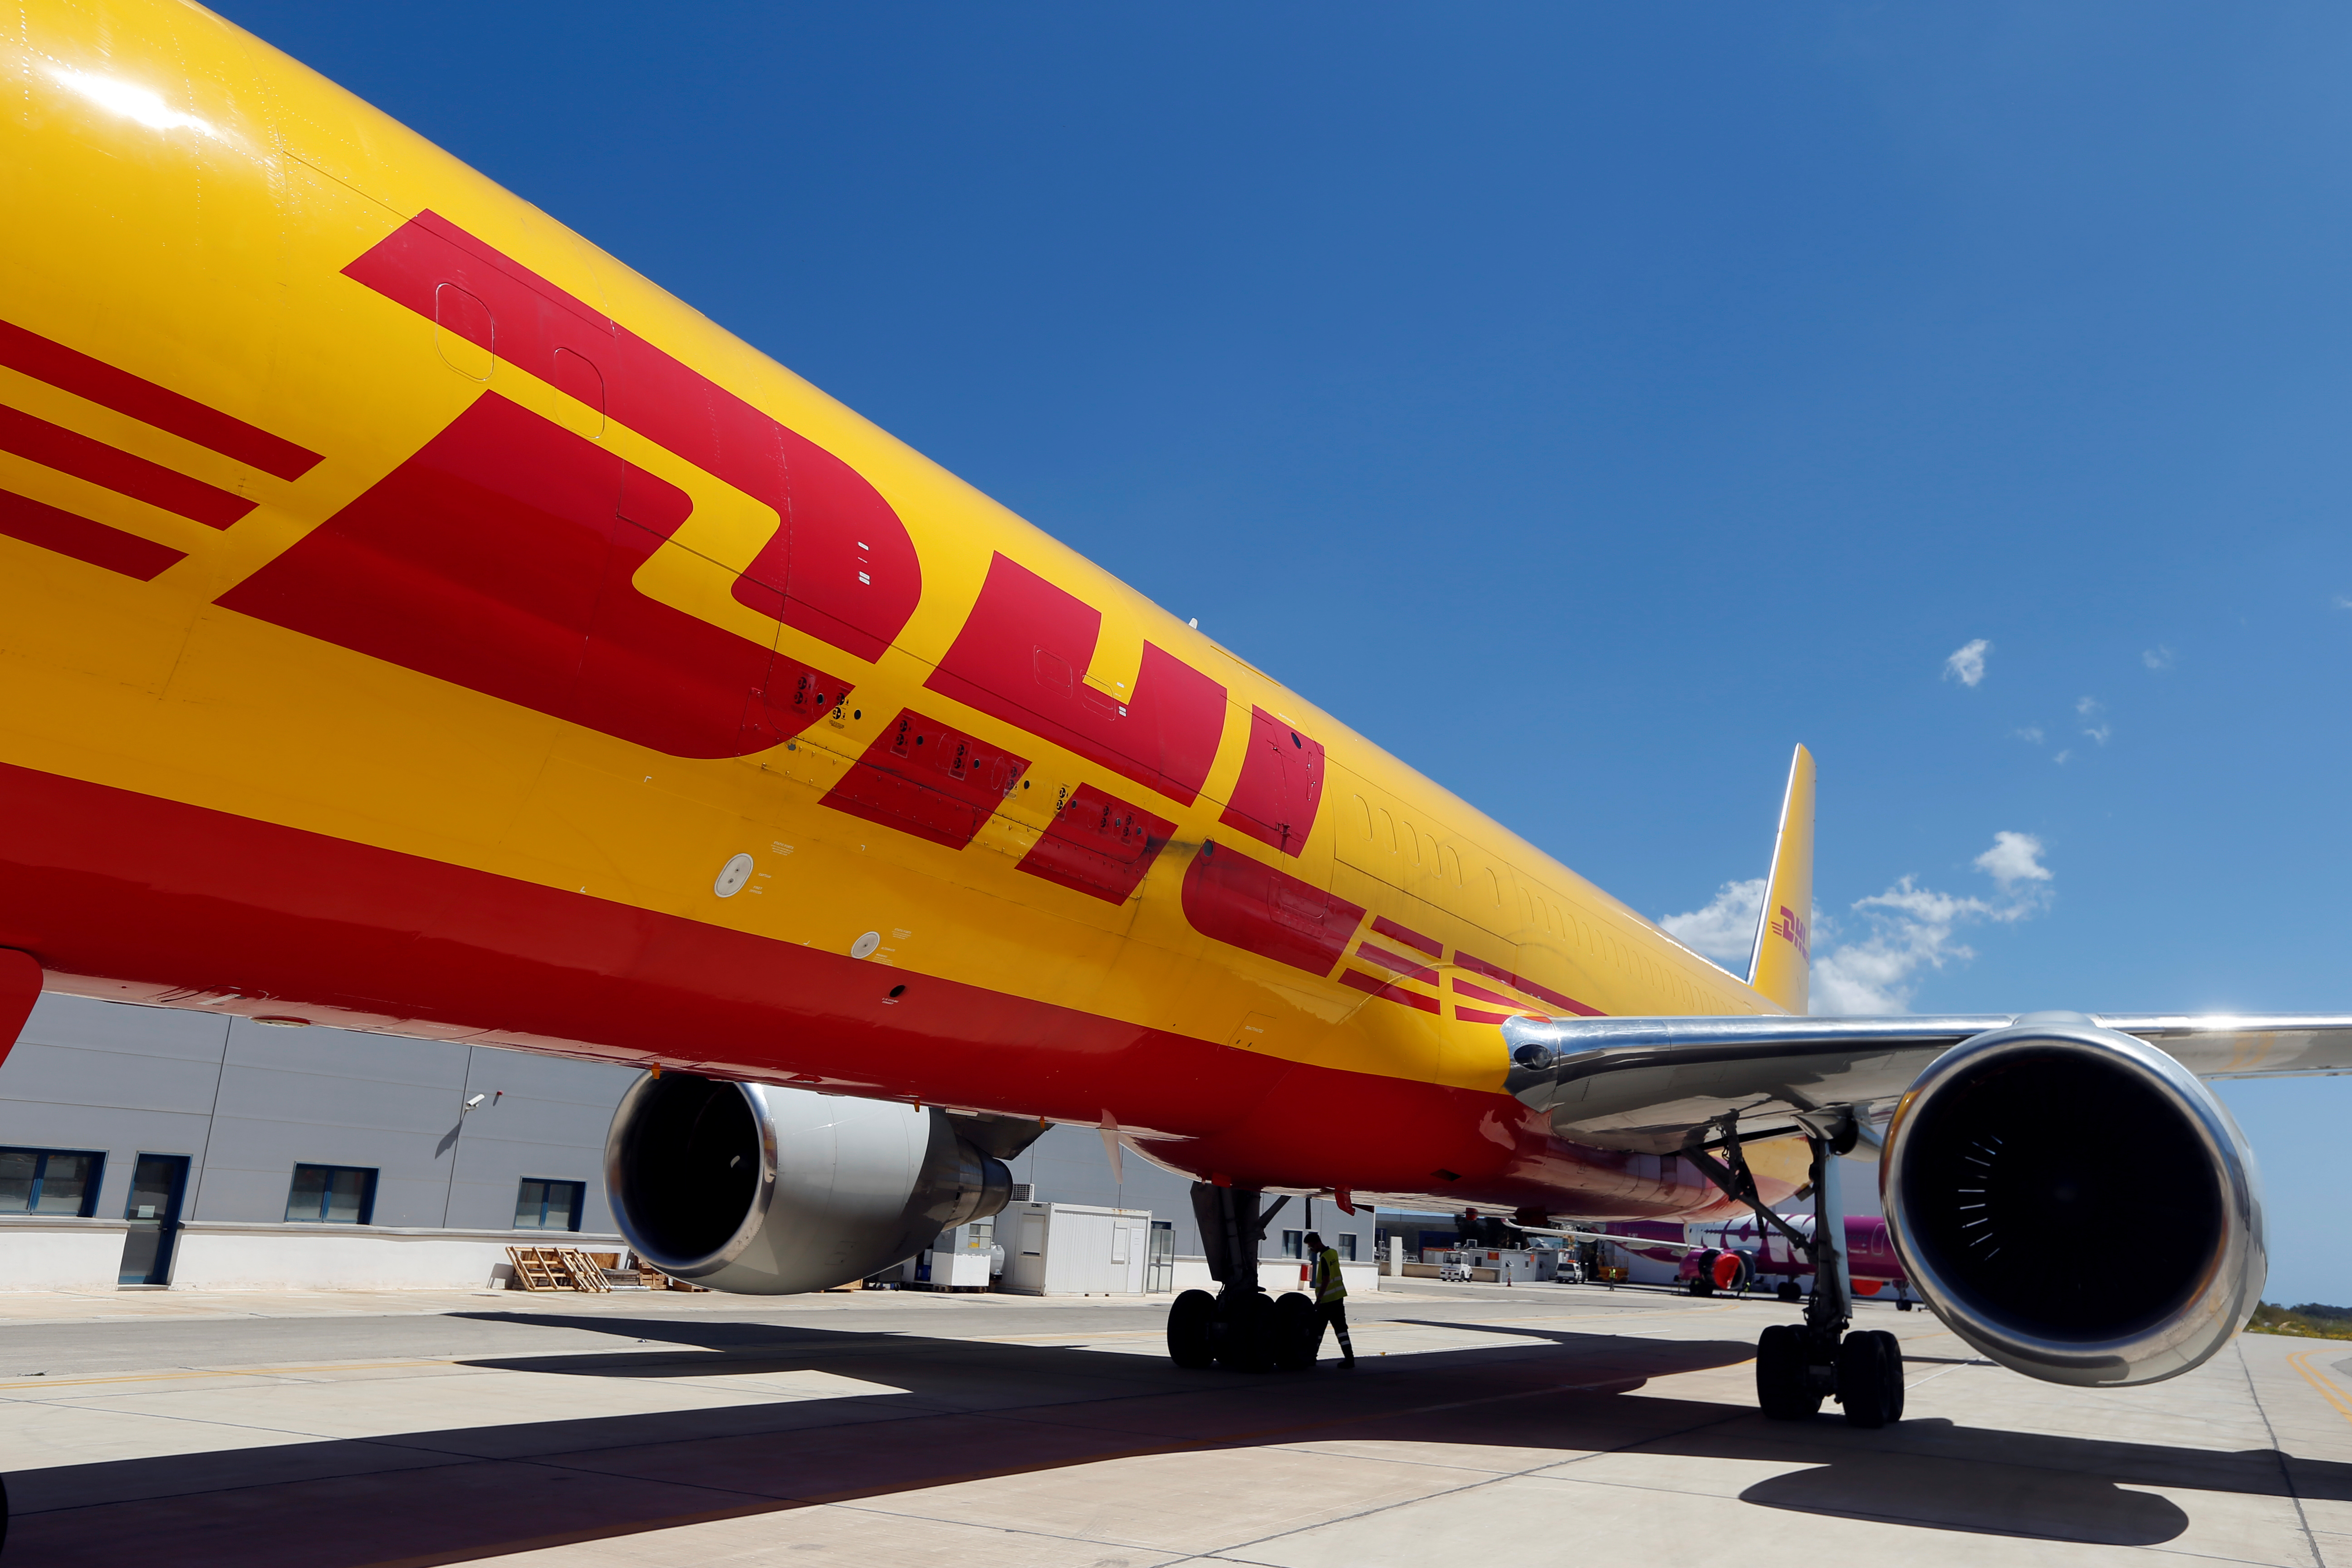 A DHL logo is seen on a DHL Boeing 757 aircraft during a charity fundraising event at the Safi Aviation Park in Safi